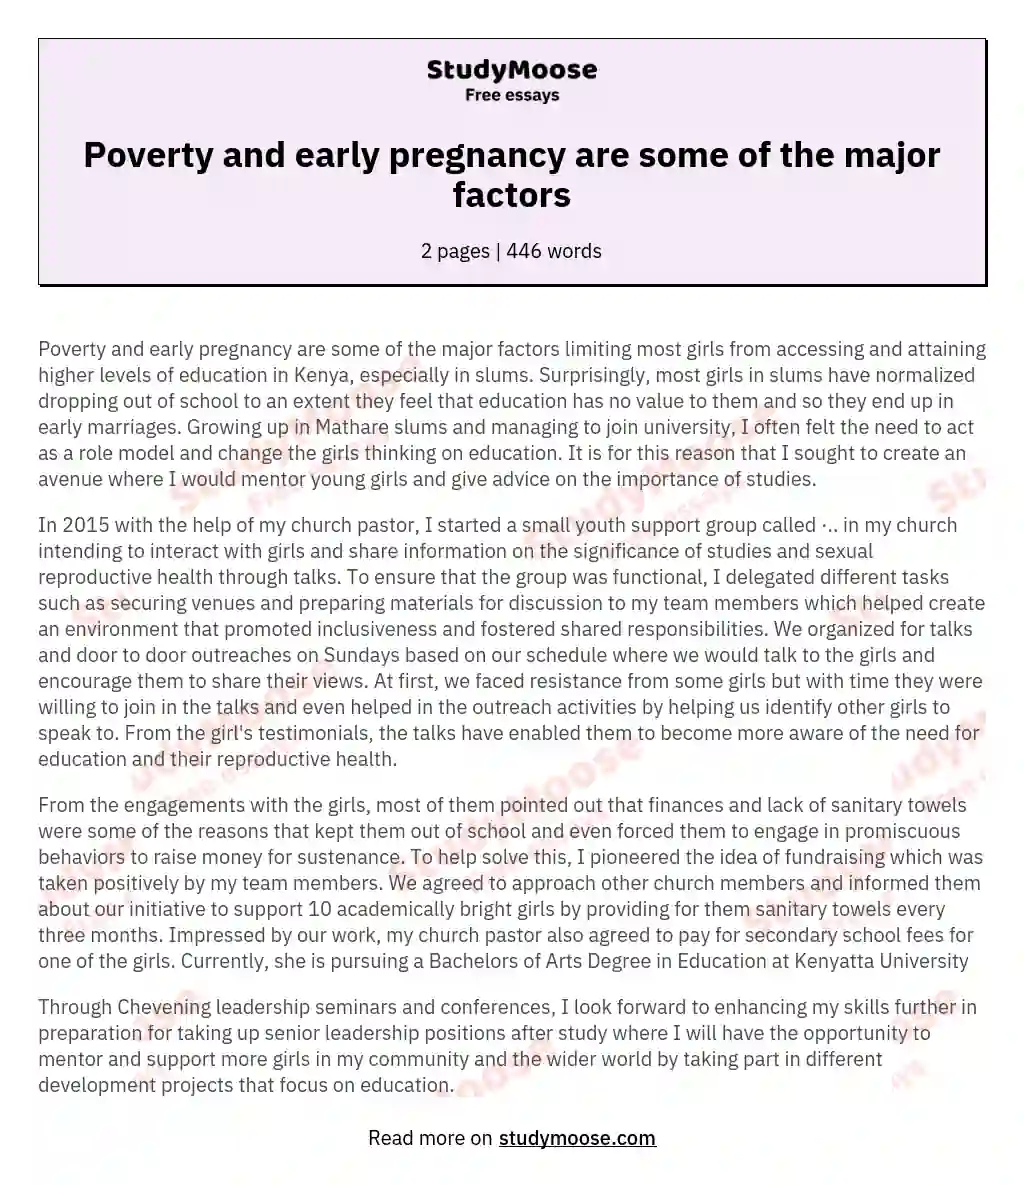 Poverty and early pregnancy are some of the major factors